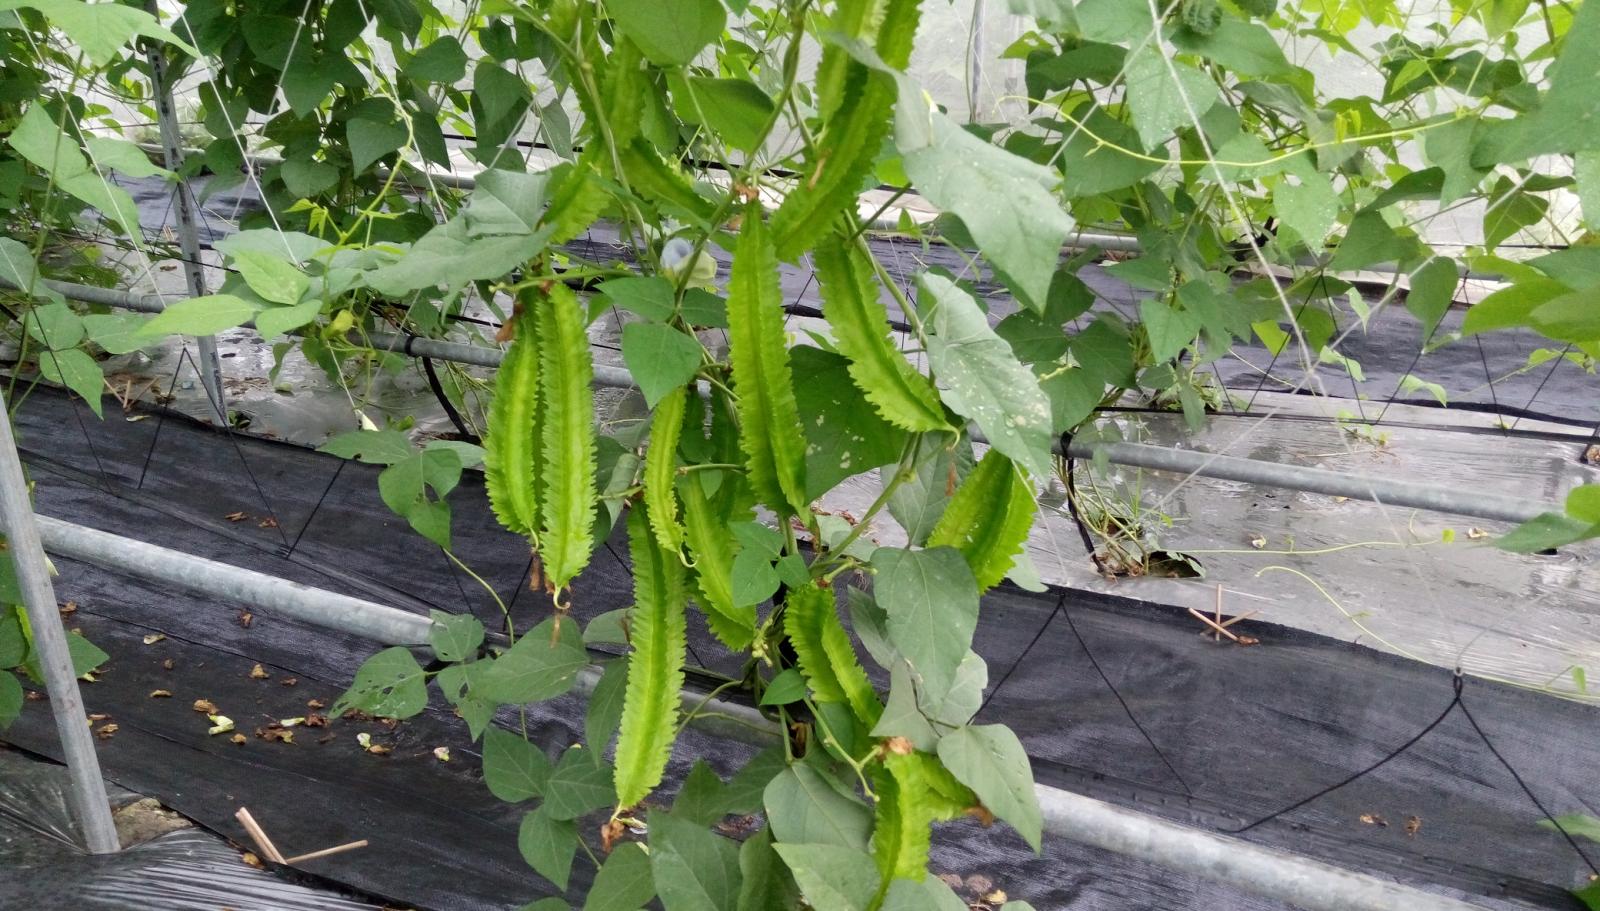 Winged bean Taitung no. 1 grown in spring yields high-quality, tender pods.